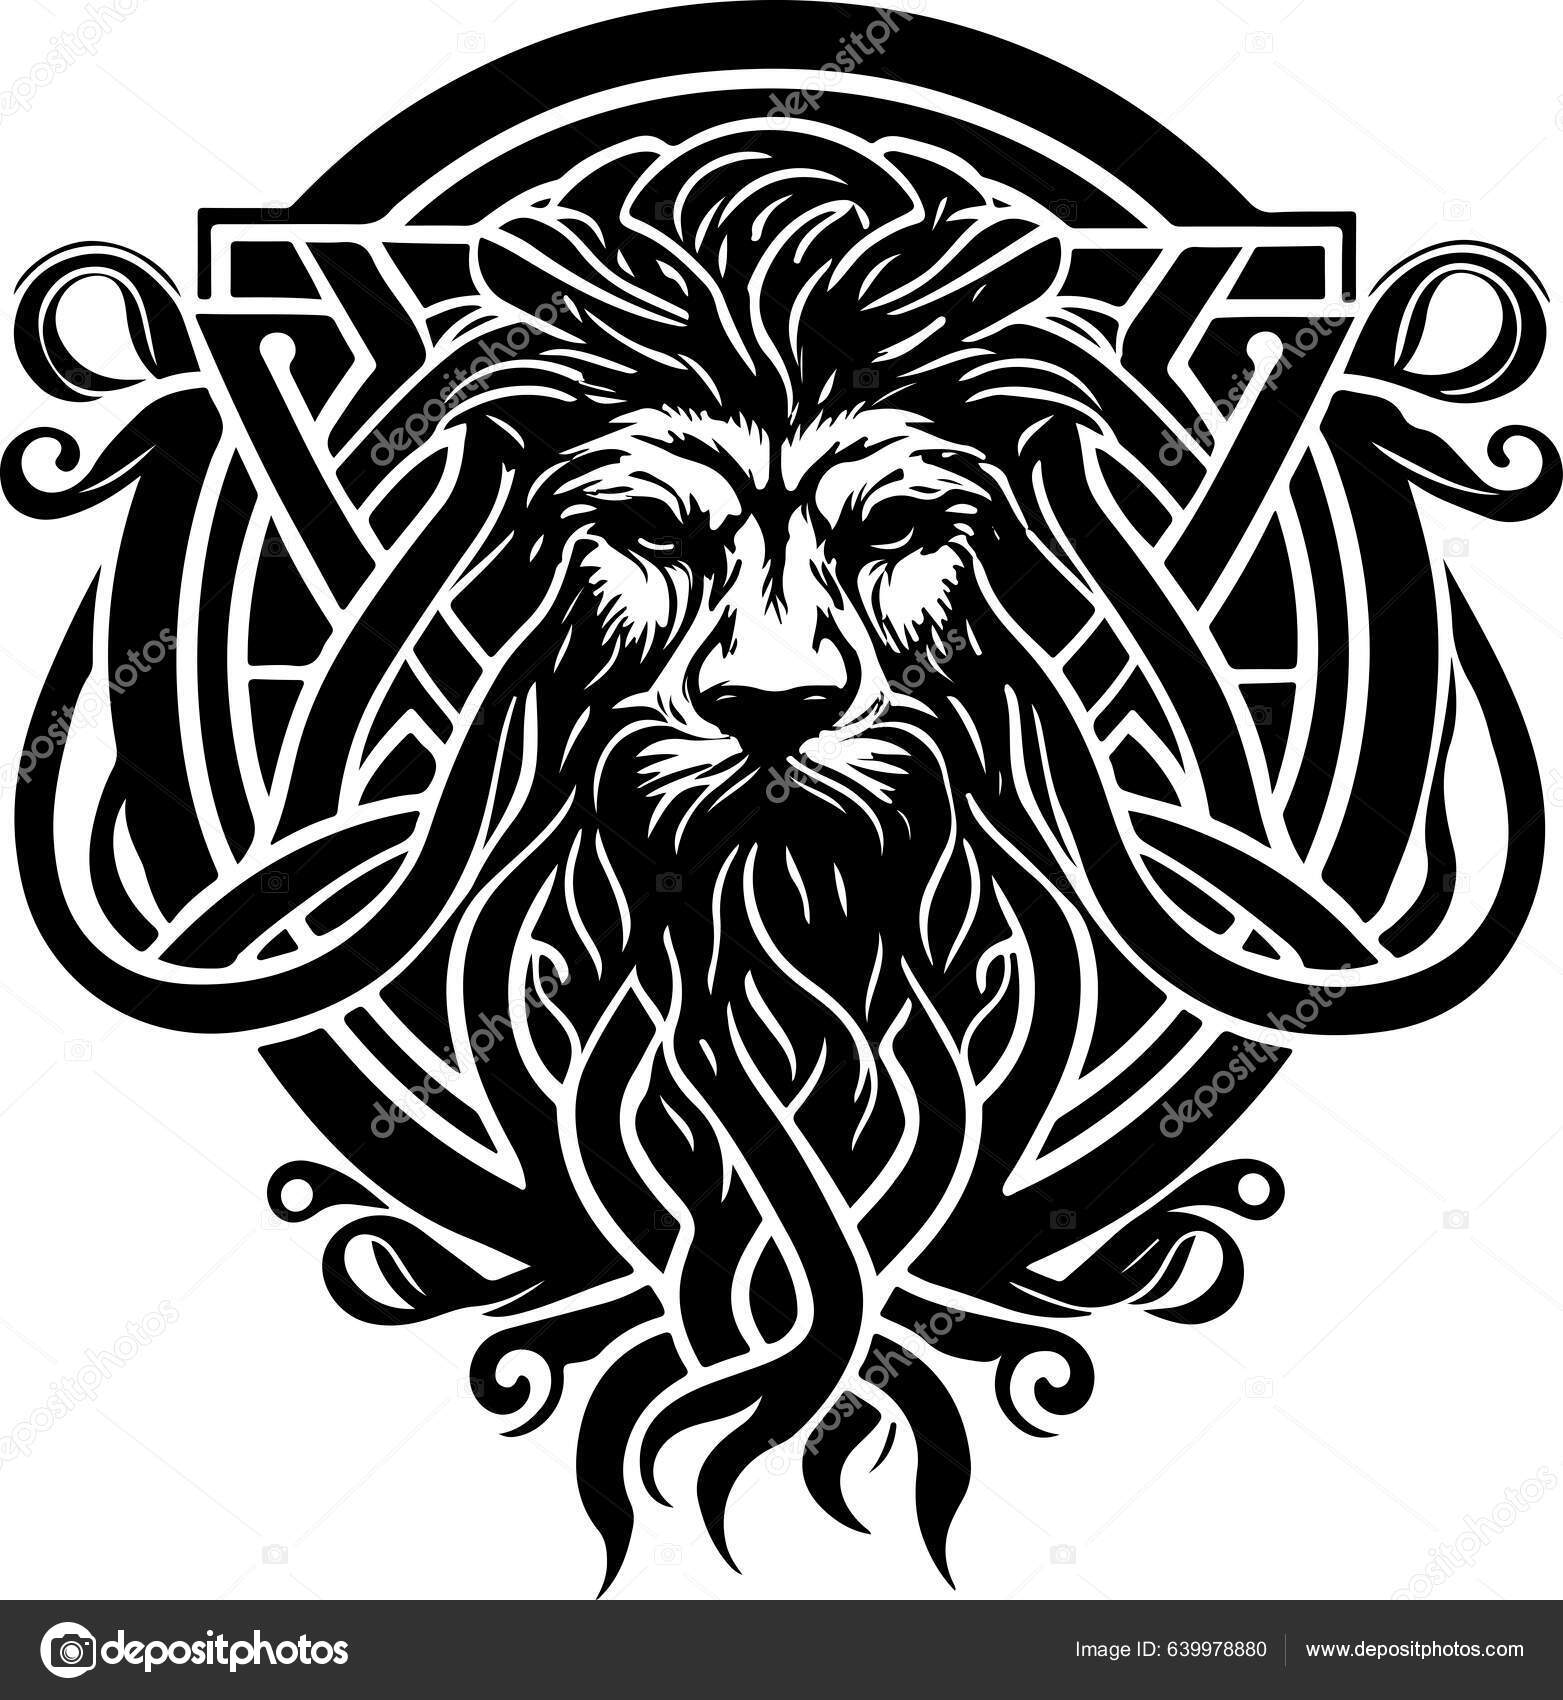 Lion And Symmetric Tribals Stock Photo, Picture and Royalty Free Image.  Image 14096850.